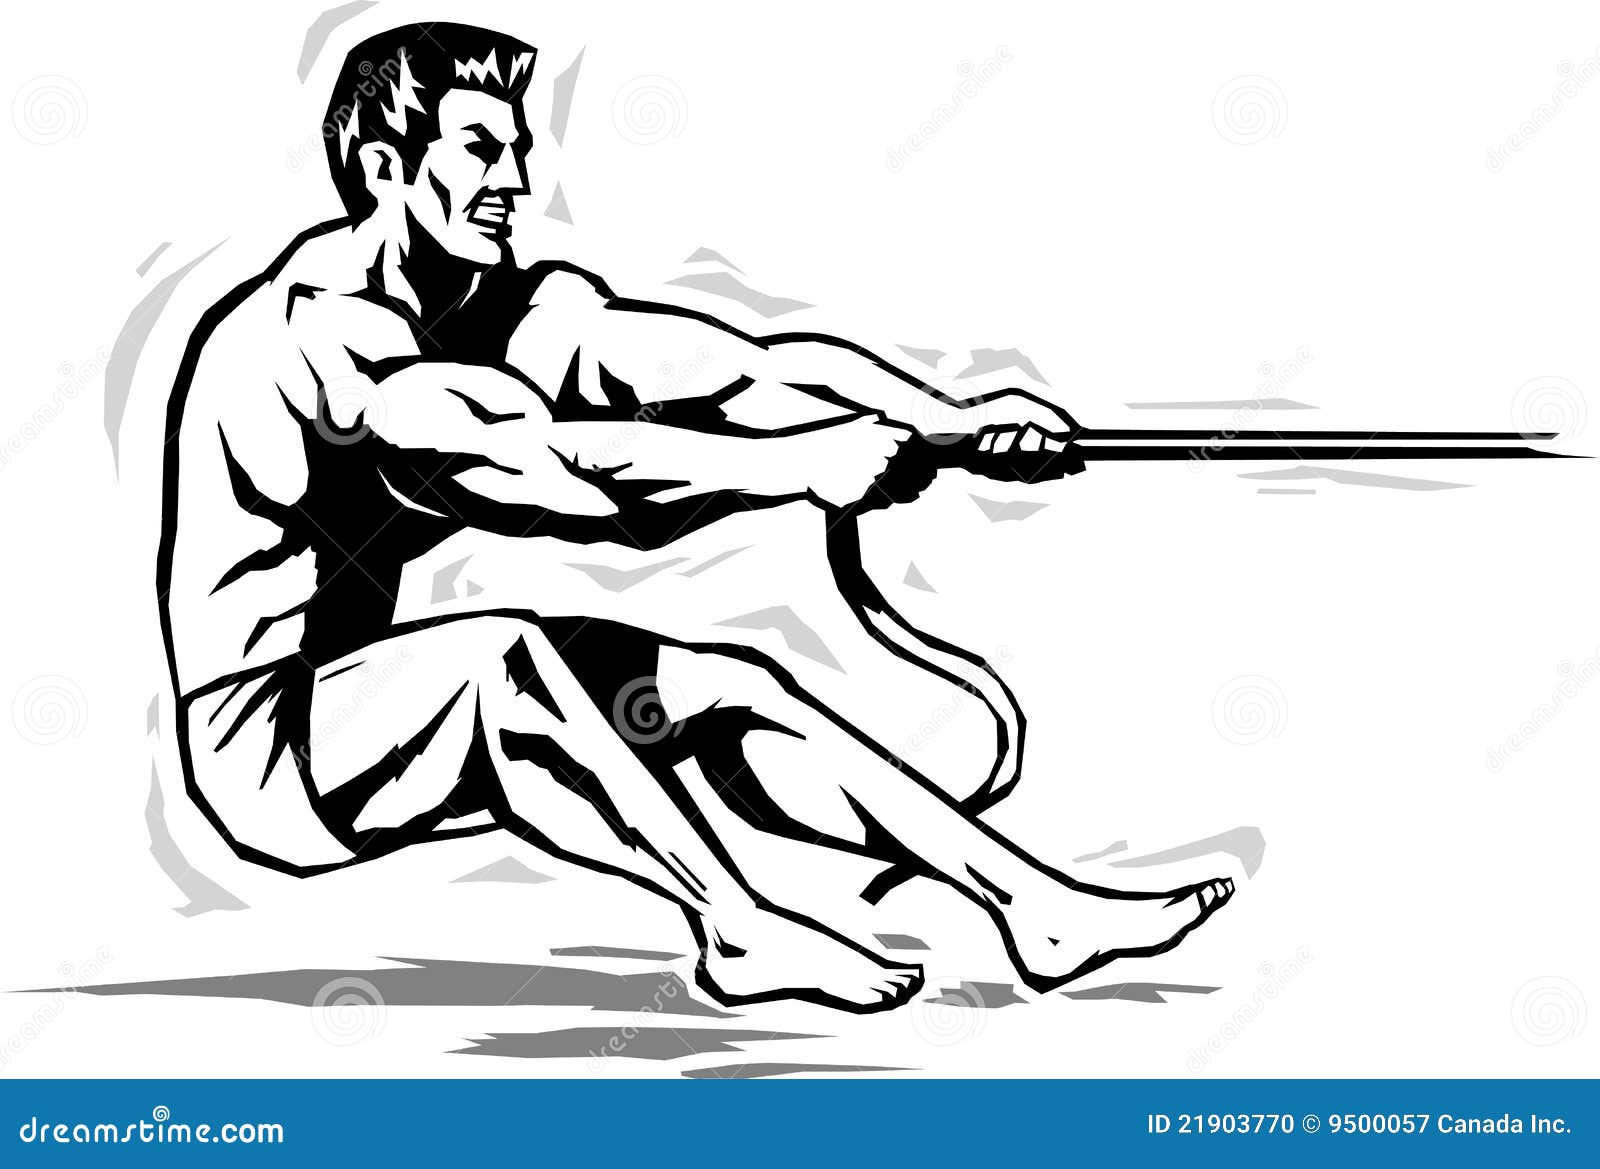 clipart man pulling rope - photo #5